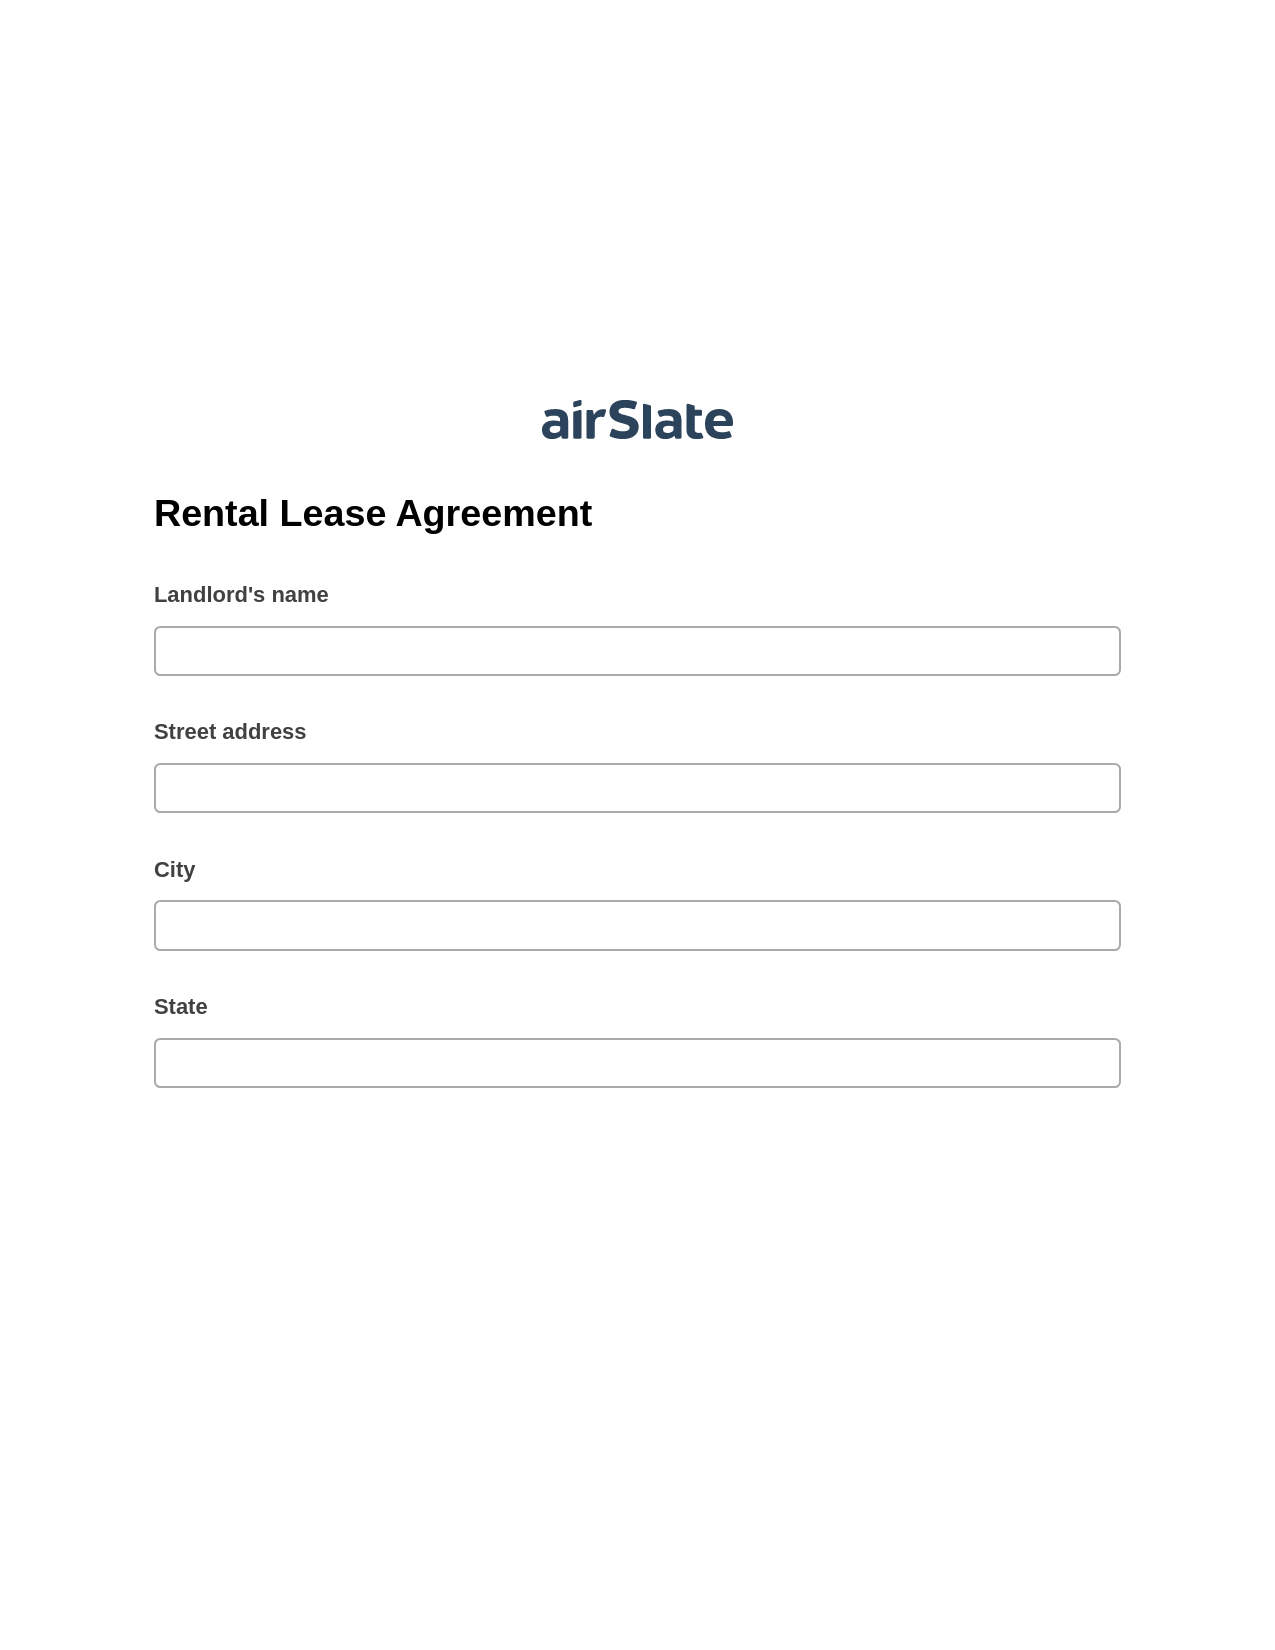 Rental Lease Agreement Pre-fill from NetSuite Records Bot, Google Cloud Print Bot, Export to Smartsheet